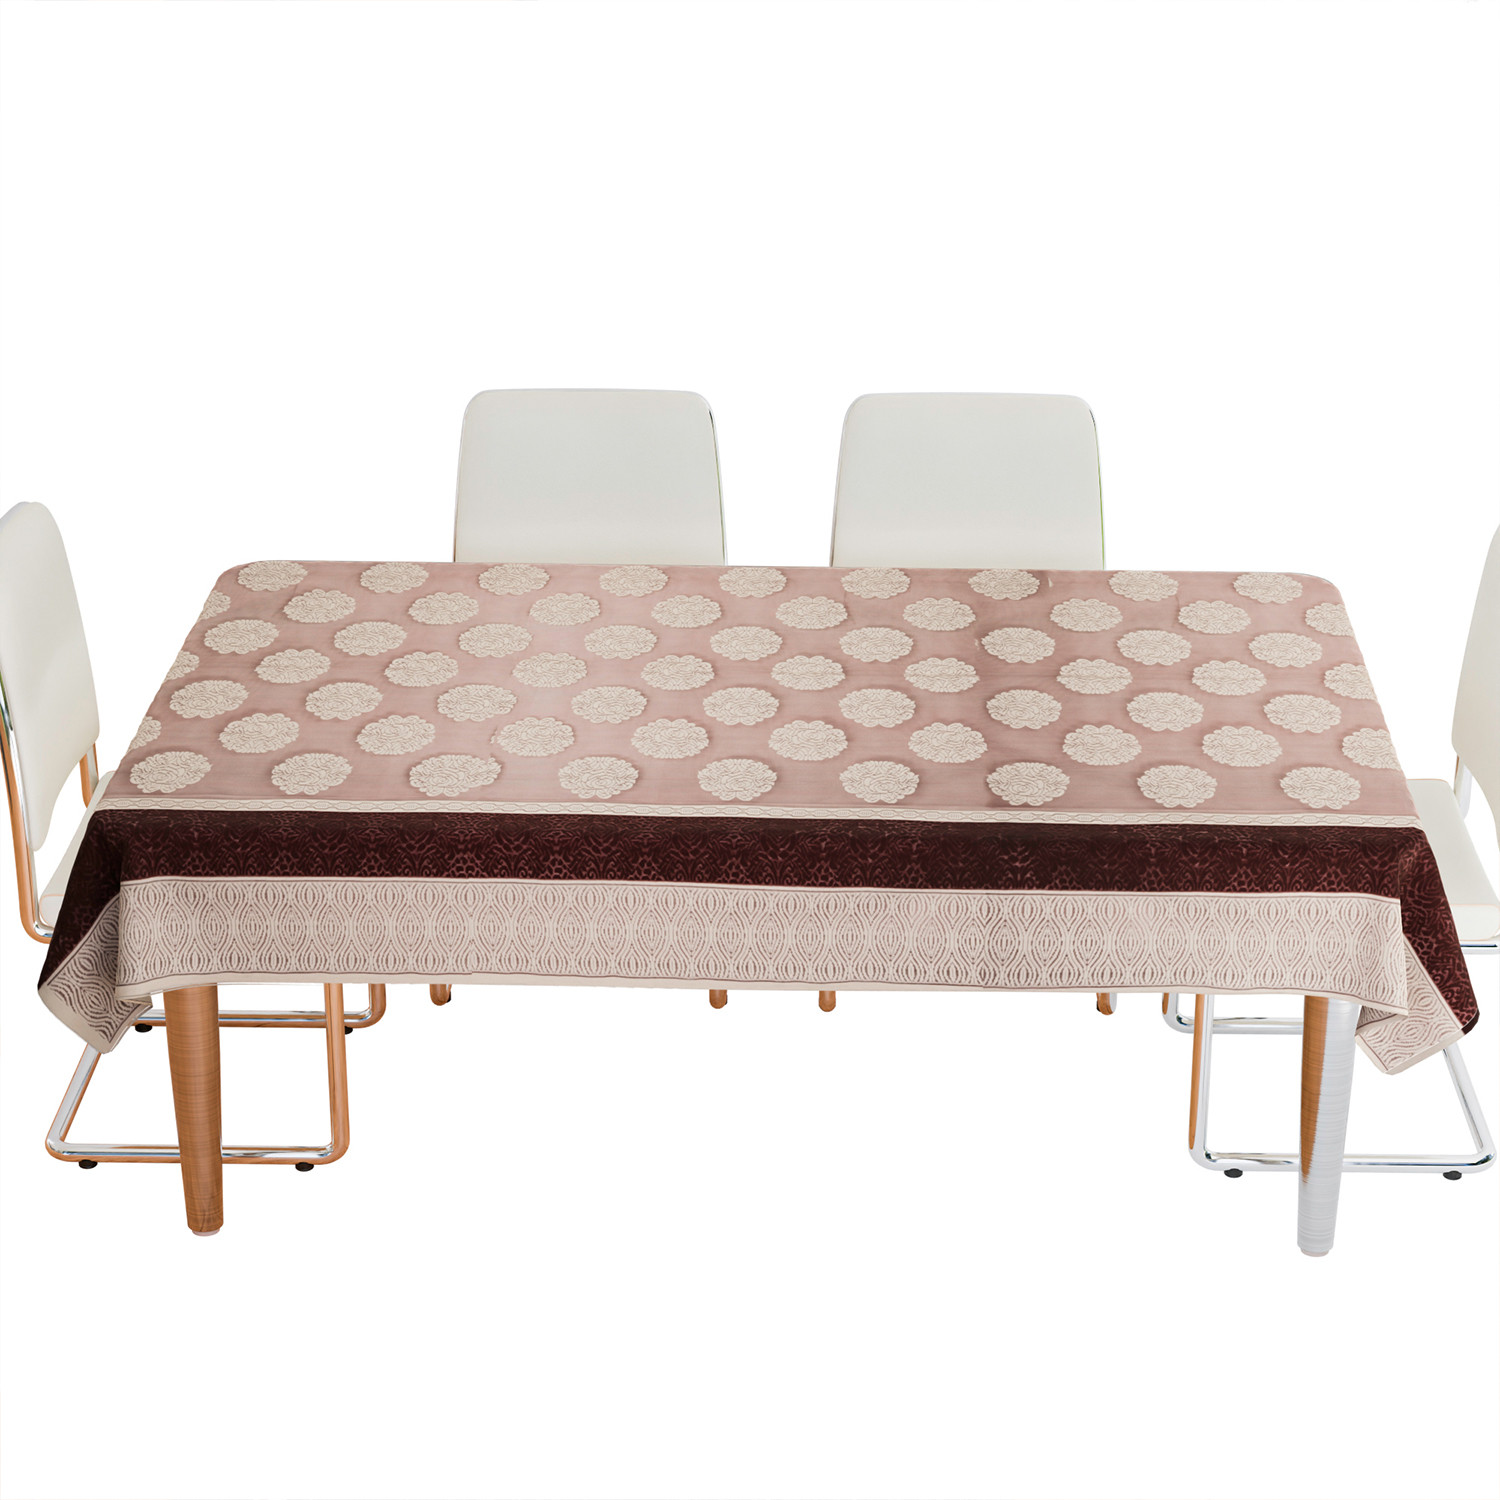 Kuber Industries Dining Table Cover | Flower Maroon Patta Dining Table Cover | Net Fabric Dining Table Cover | Tablecloth for Dining Area | Home Decor | 60x90 | Maroon